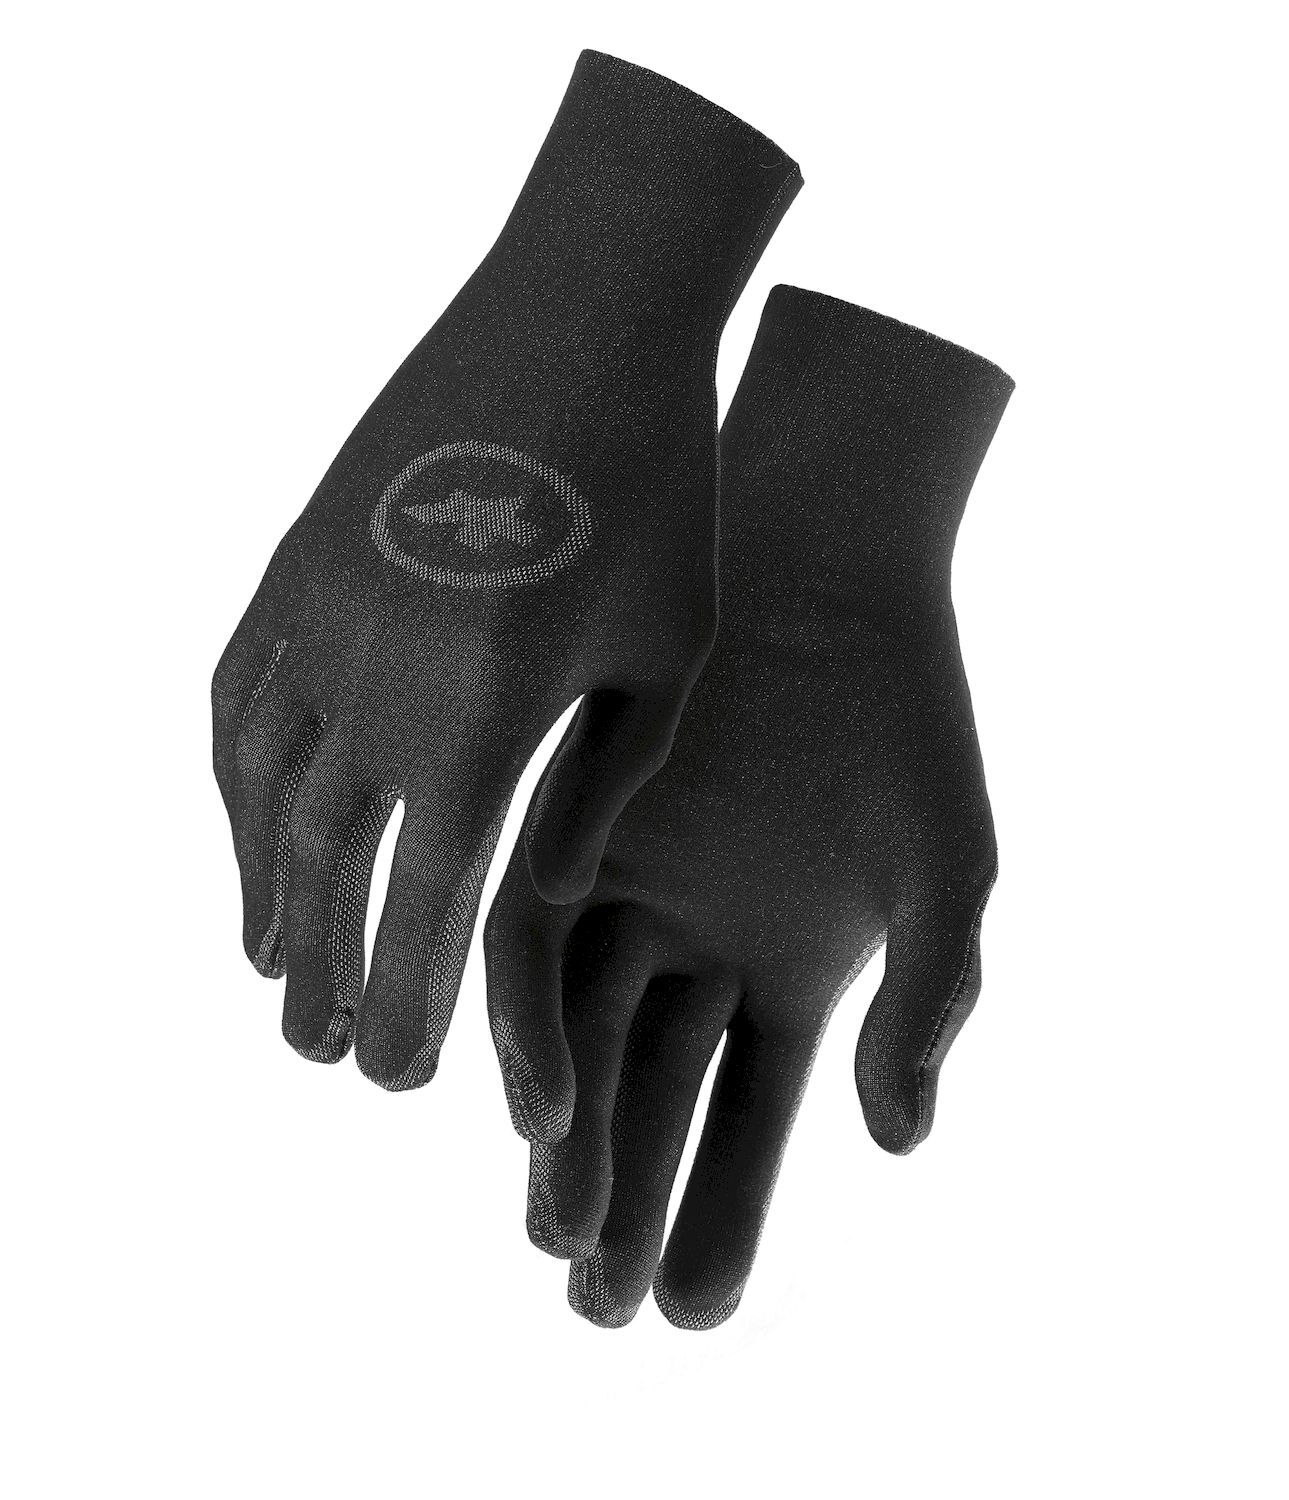 Assos Spring Fall Liner Gloves - Guanti ciclismo